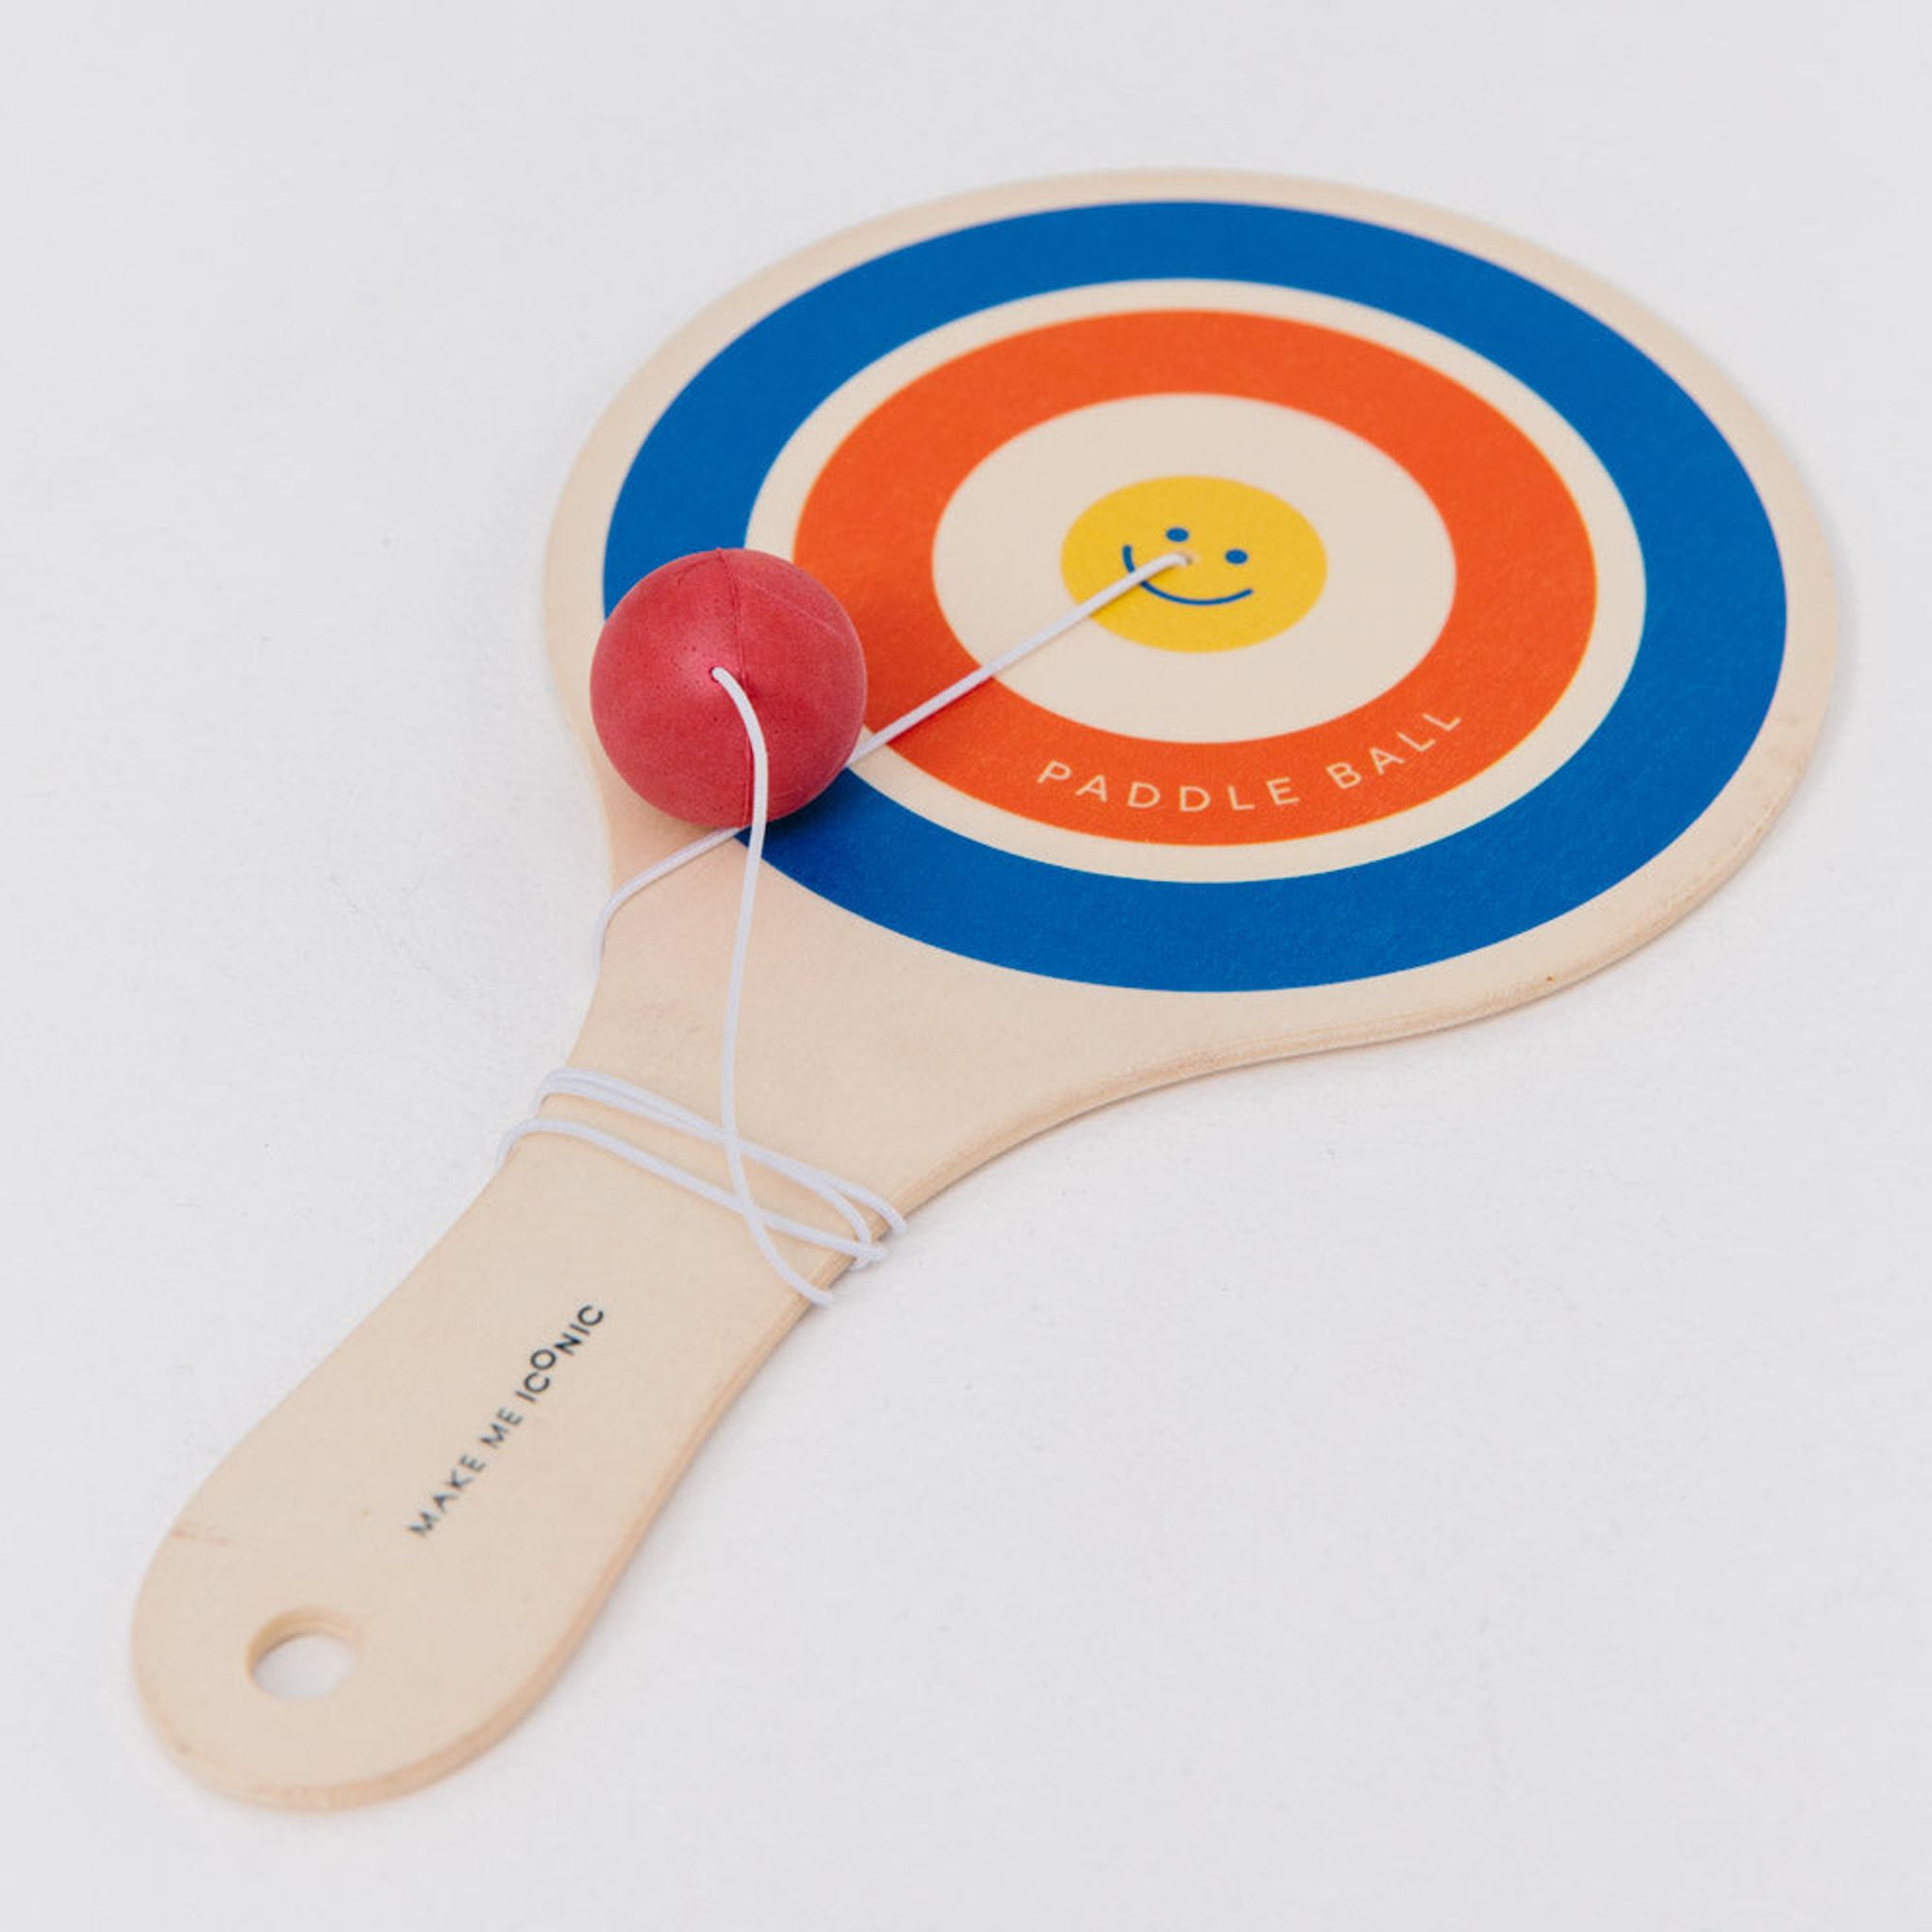 Iconic Toy - Loose Change Paddle Ball - Toybox Tales